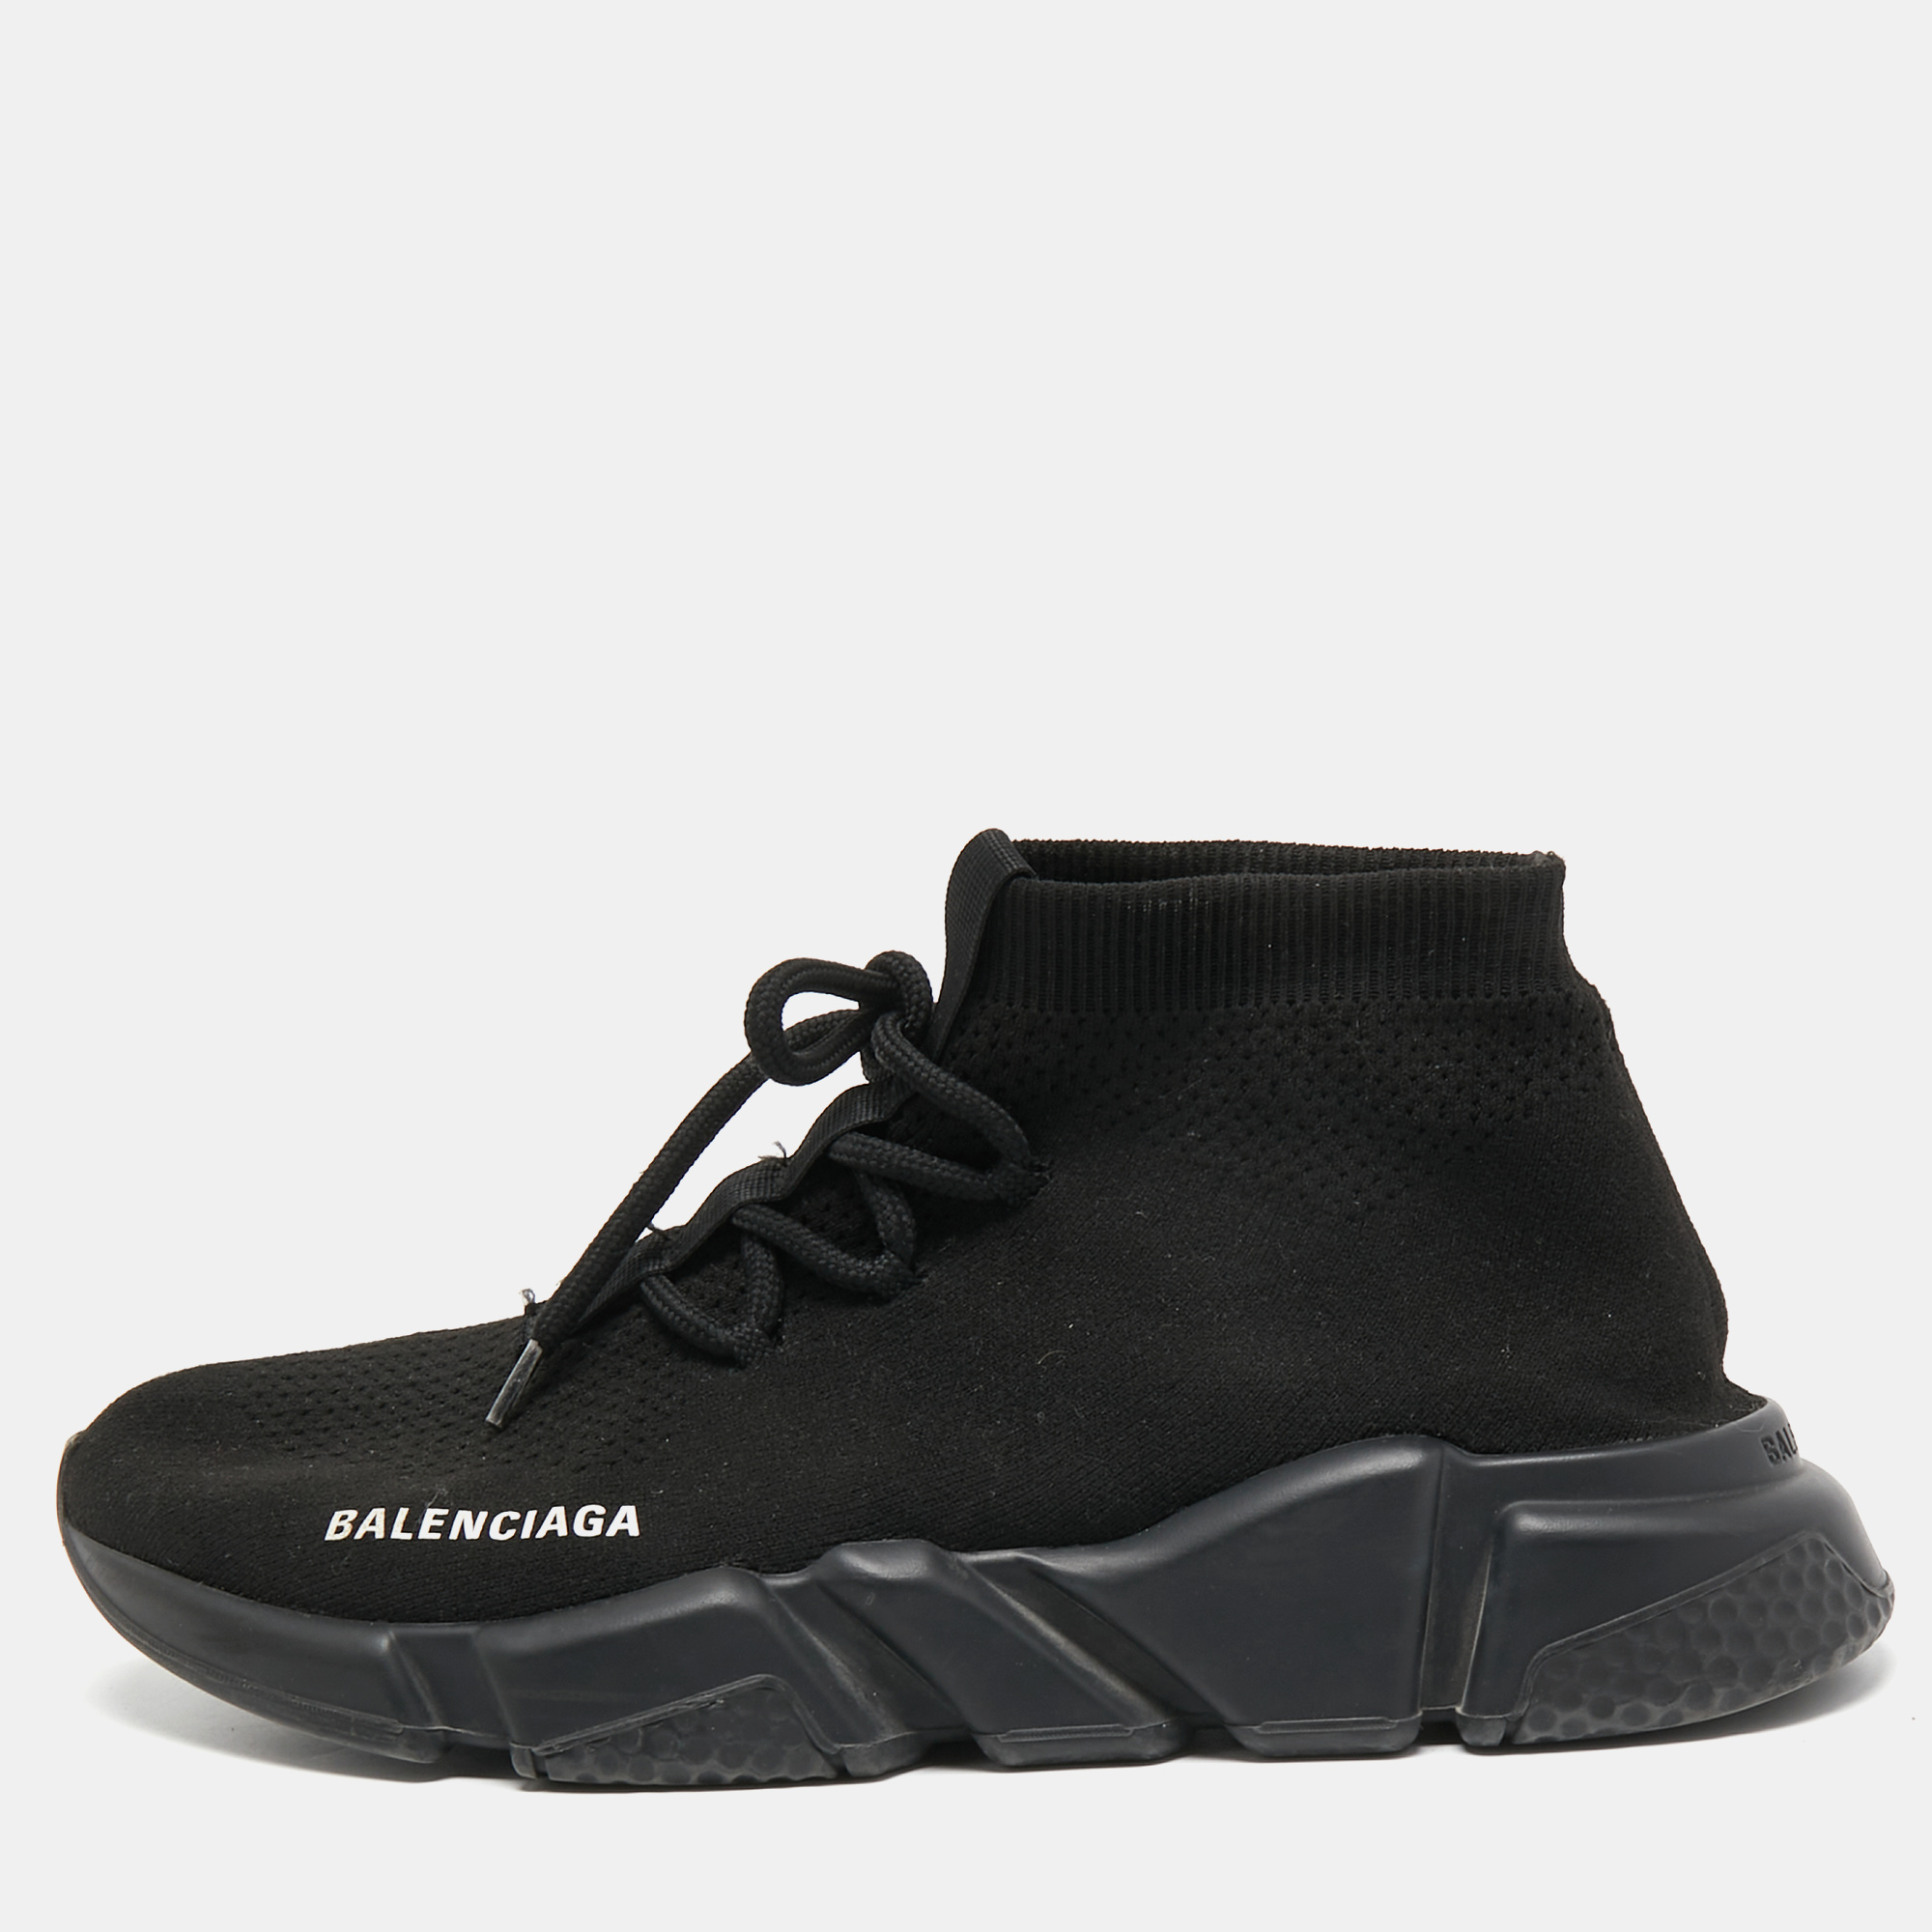 Pre-owned Balenciaga Black Knit Fabric Speed Sneaker Size 40